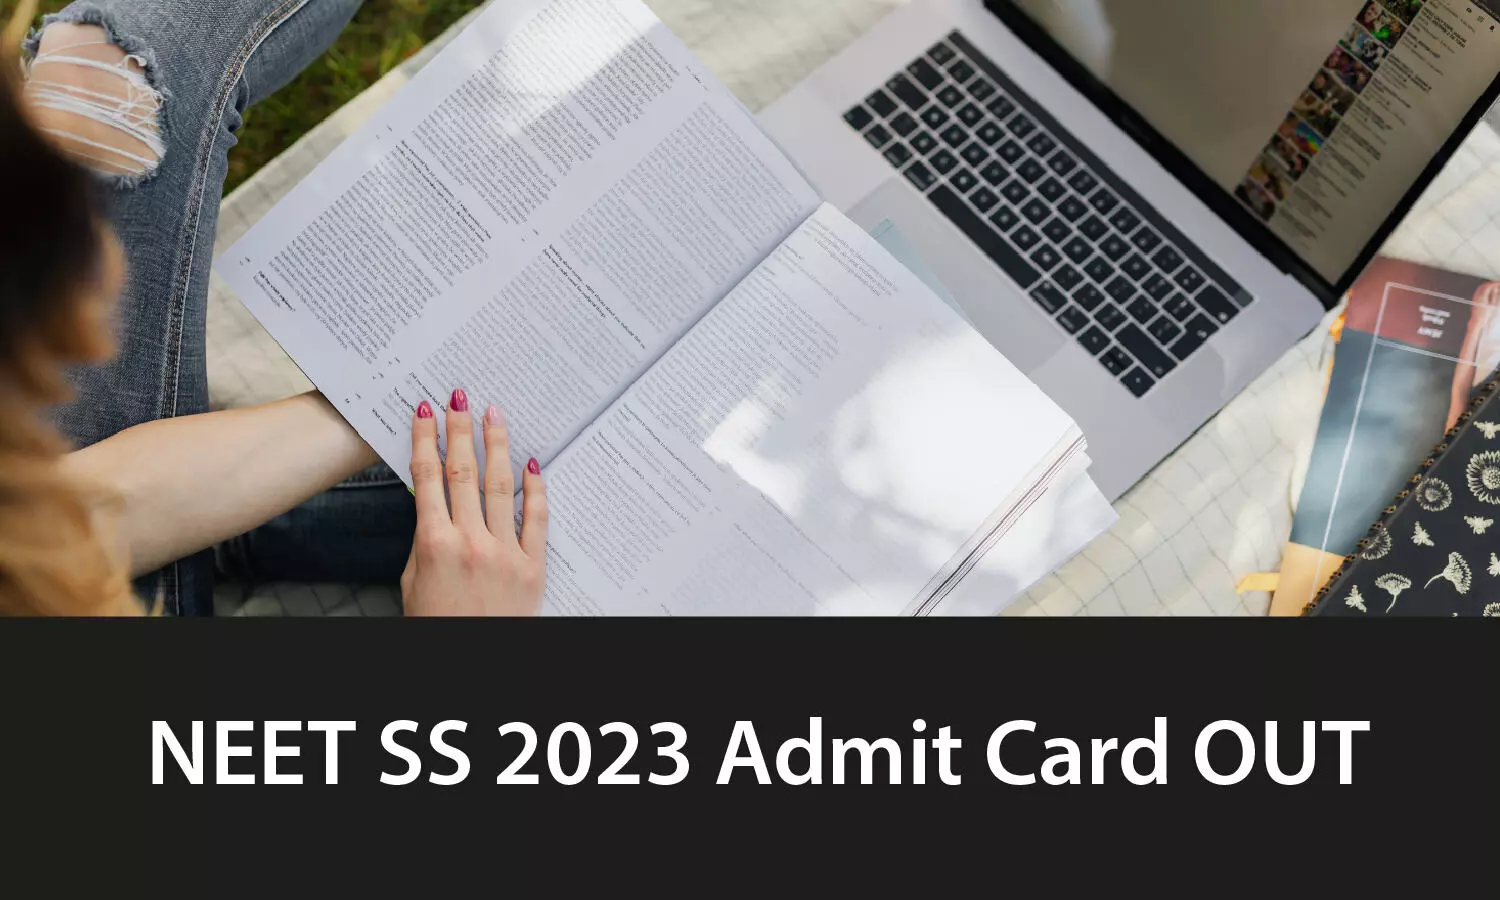 NBE releases admit card for NEET SS 2023